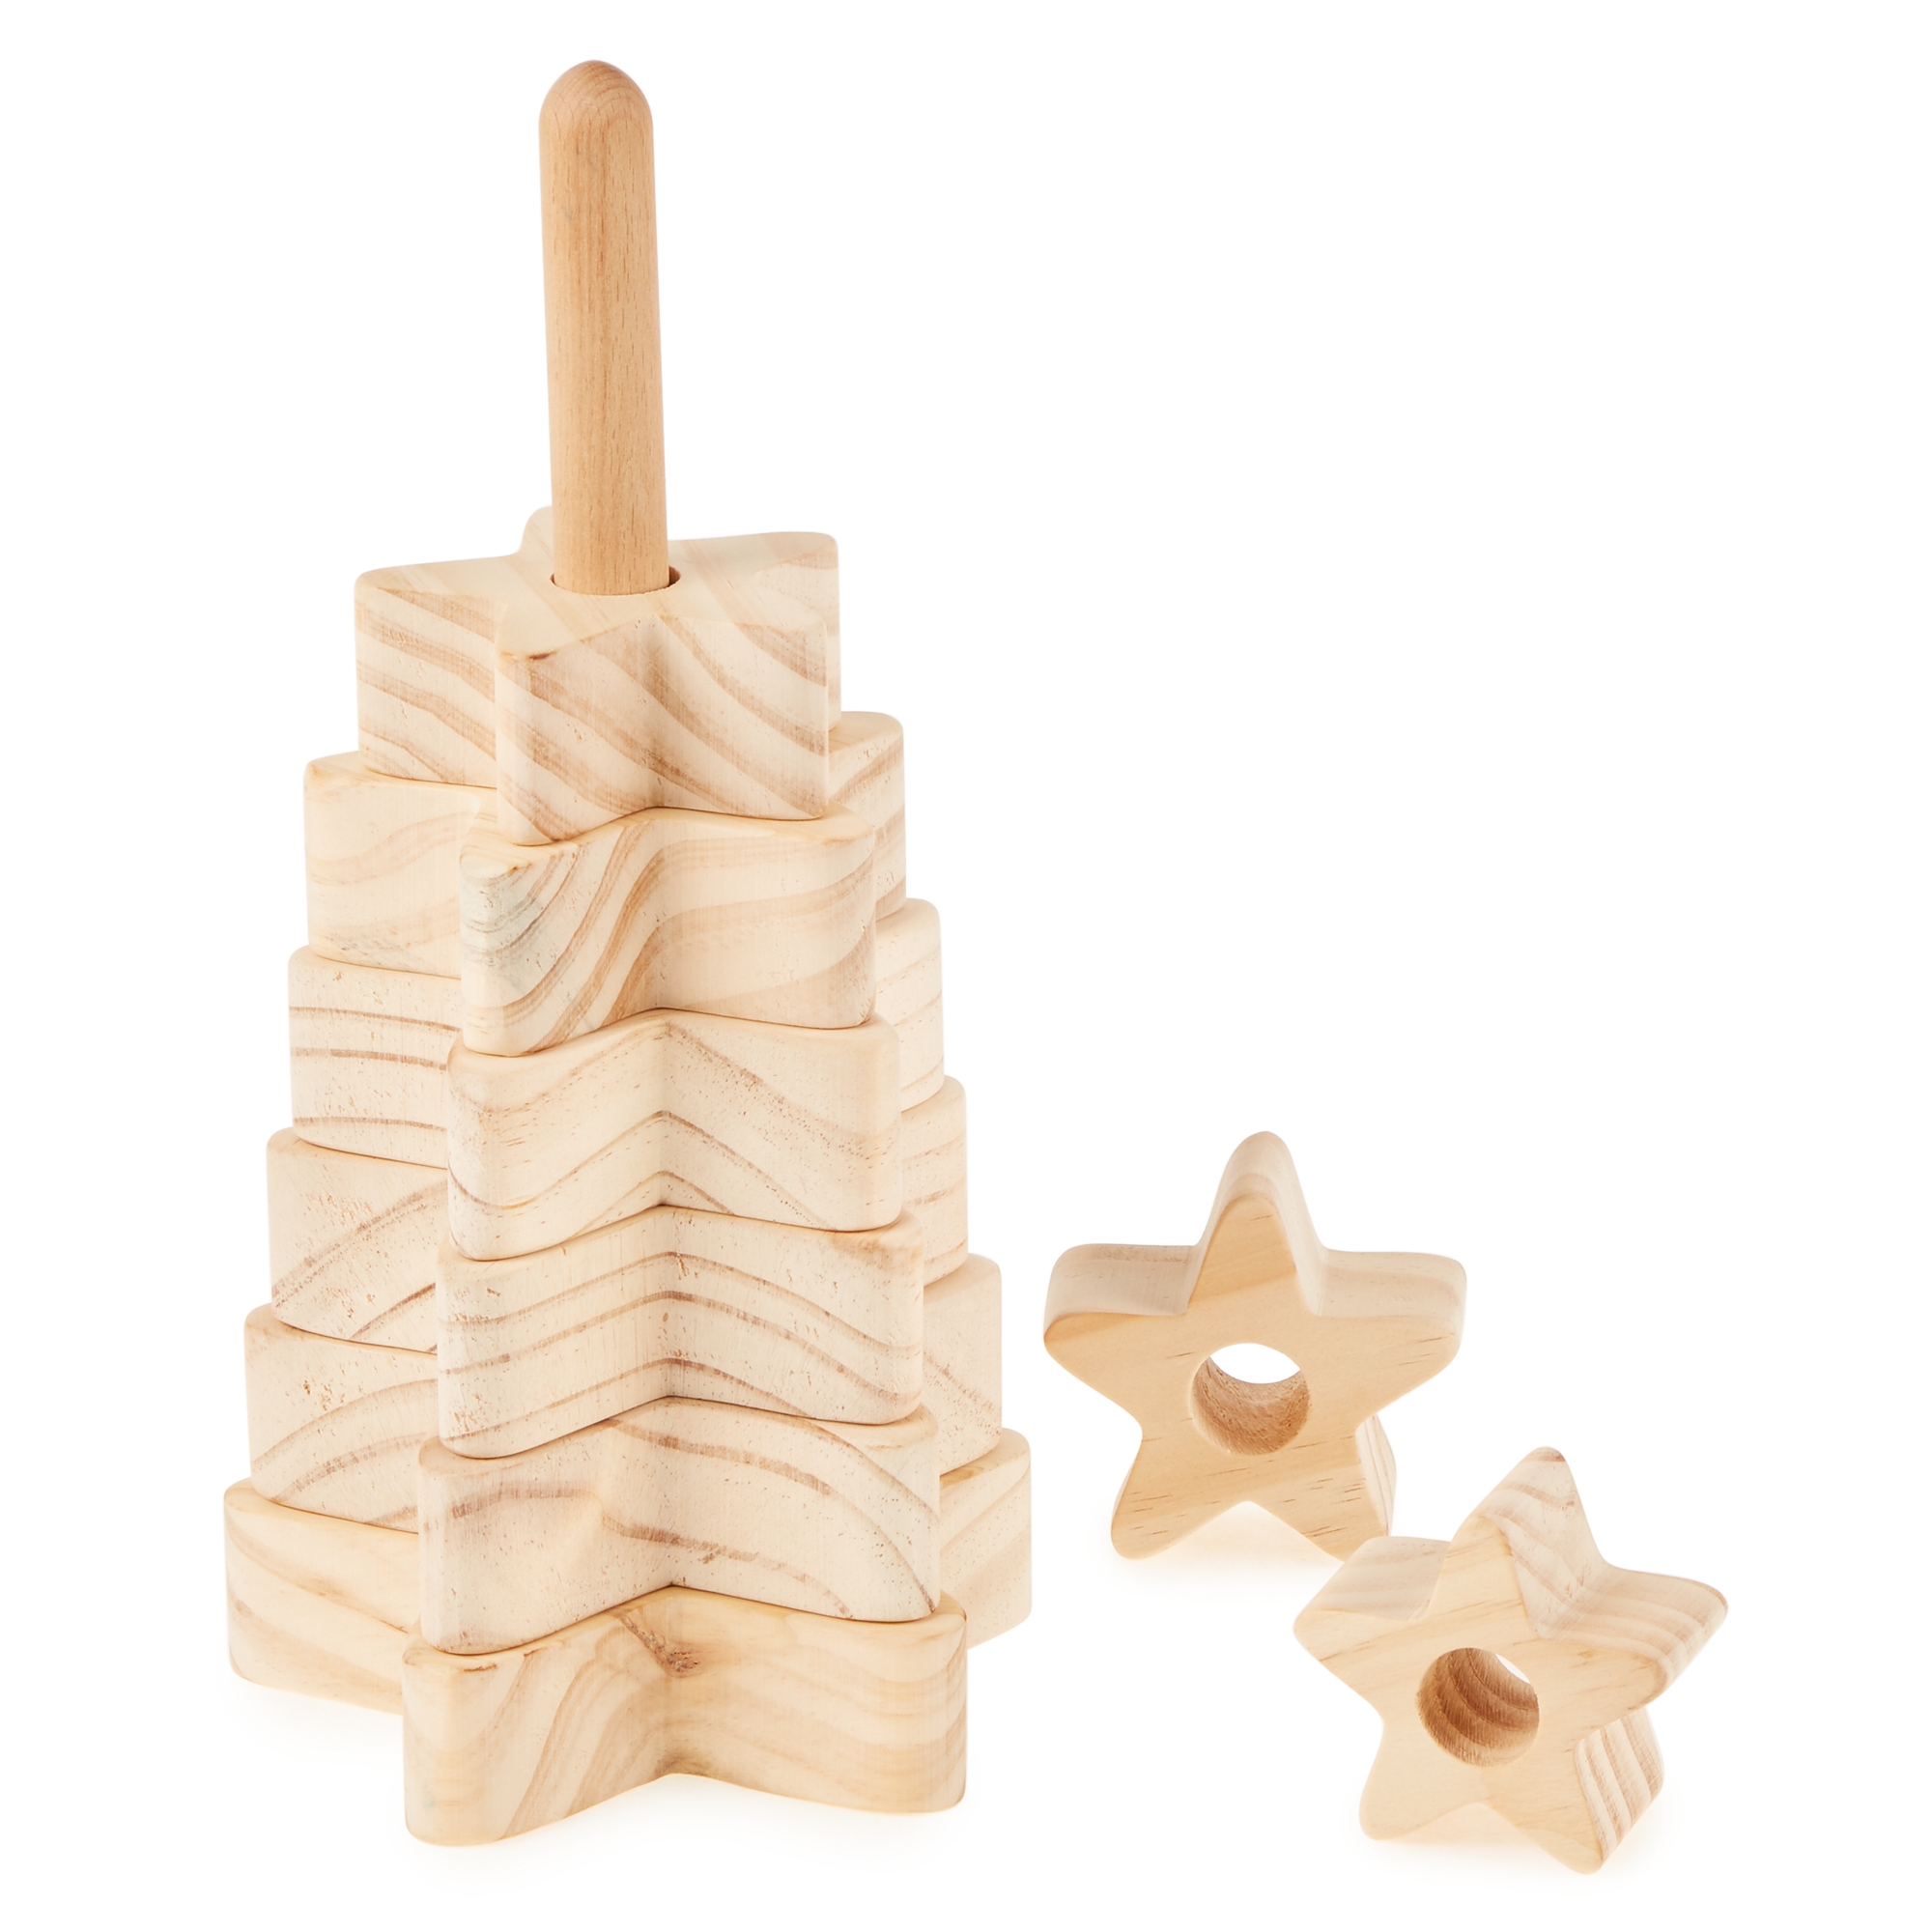 Wooden Star Stacker from Hope Education